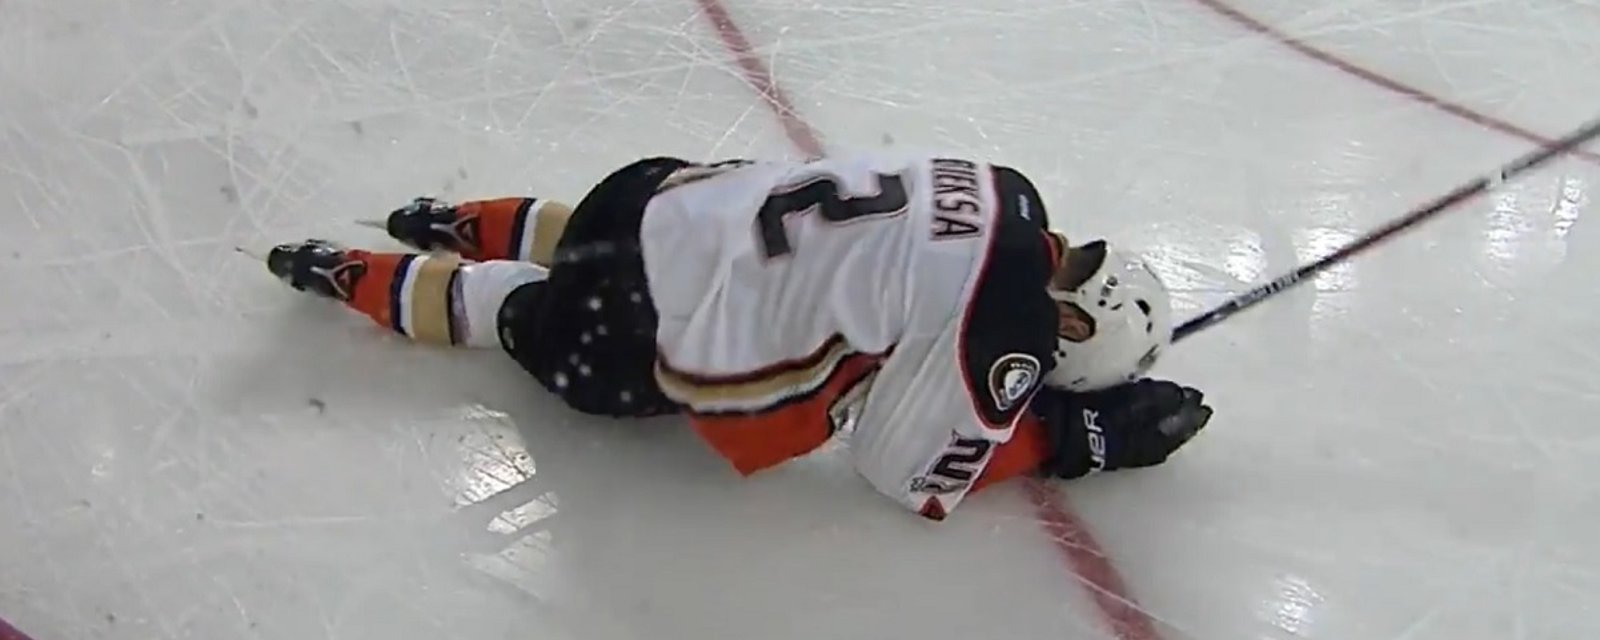 Breaking: Bieksa gets rocked by a very questionable hit from behind.